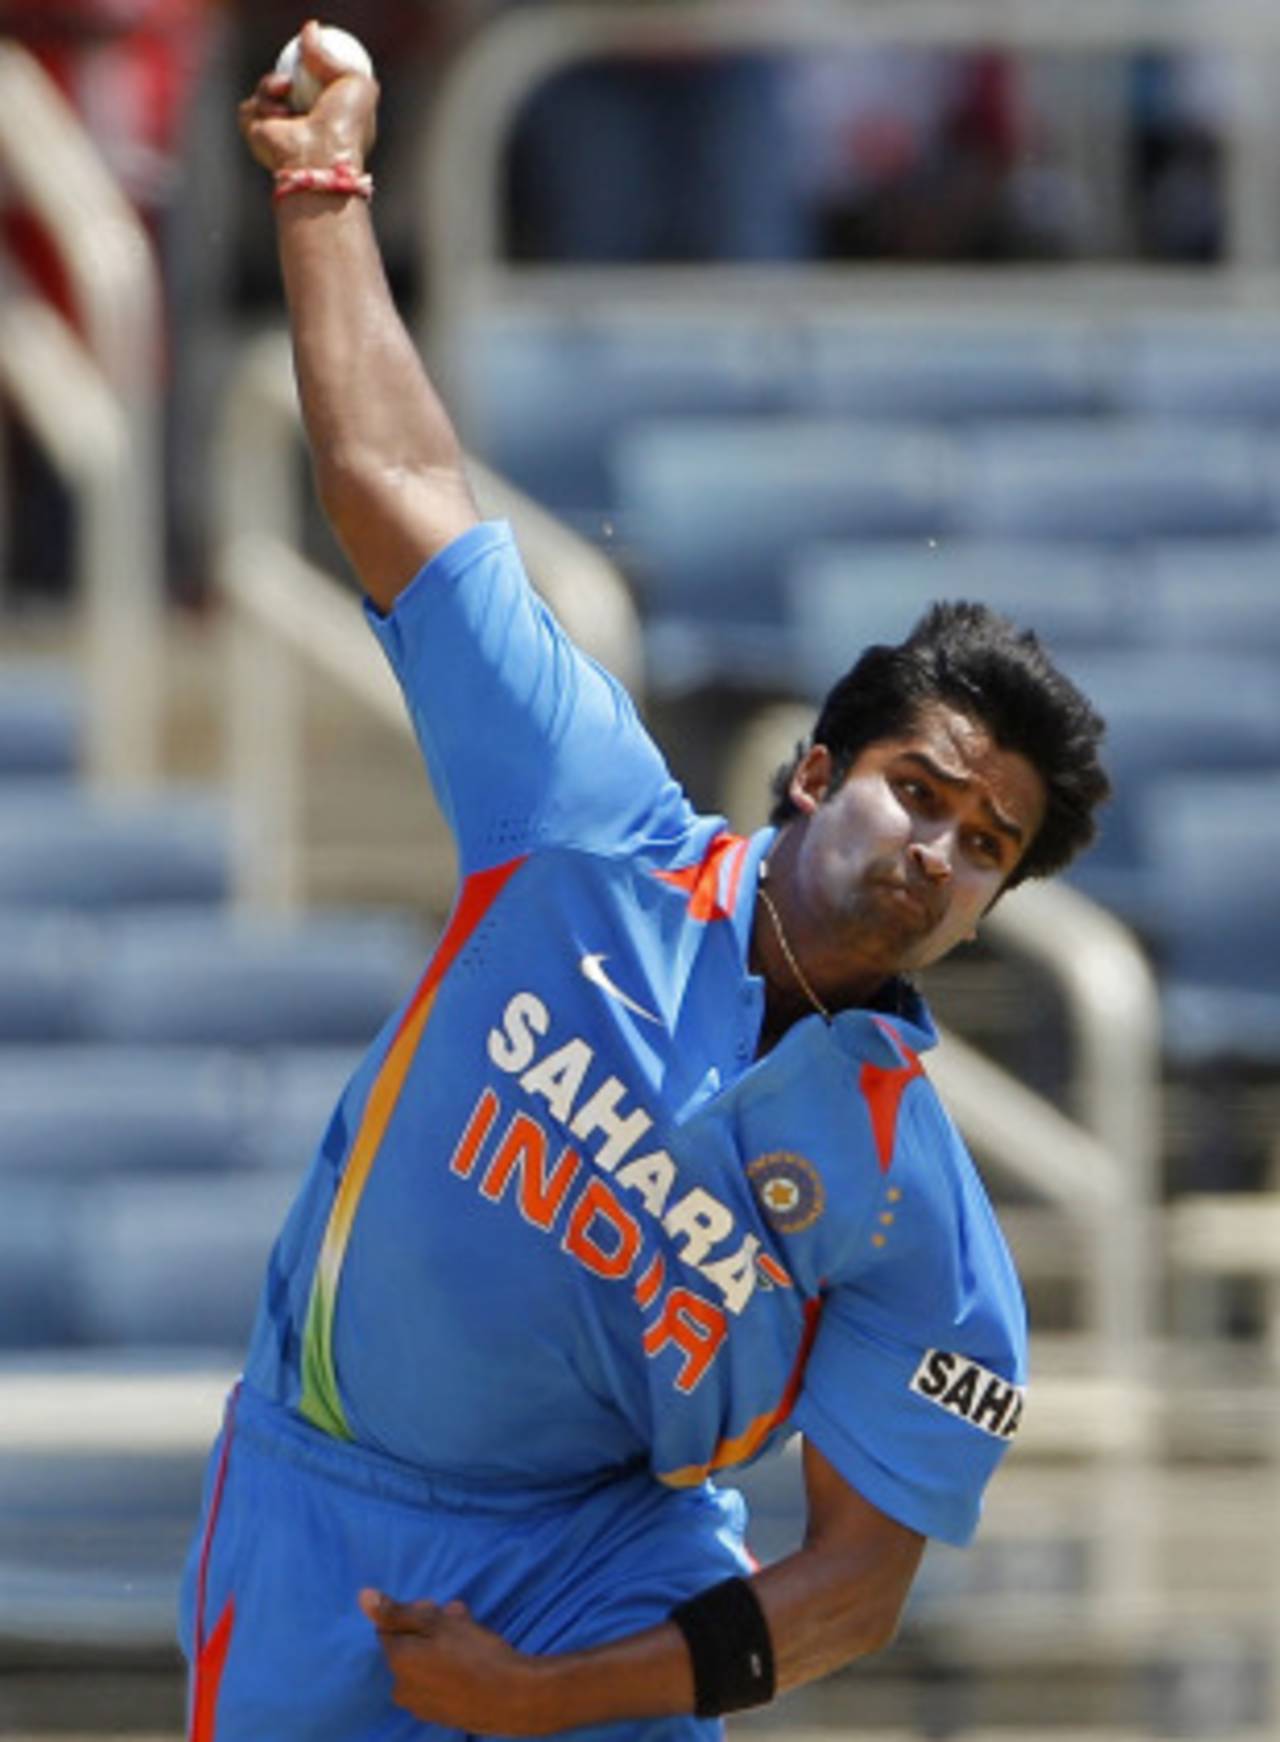 Vinay Kumar bowled an outstanding opening spell: 5-2-6-1, West Indies v India, 5th ODI, Kingston, Jamaica, June 16, 2011